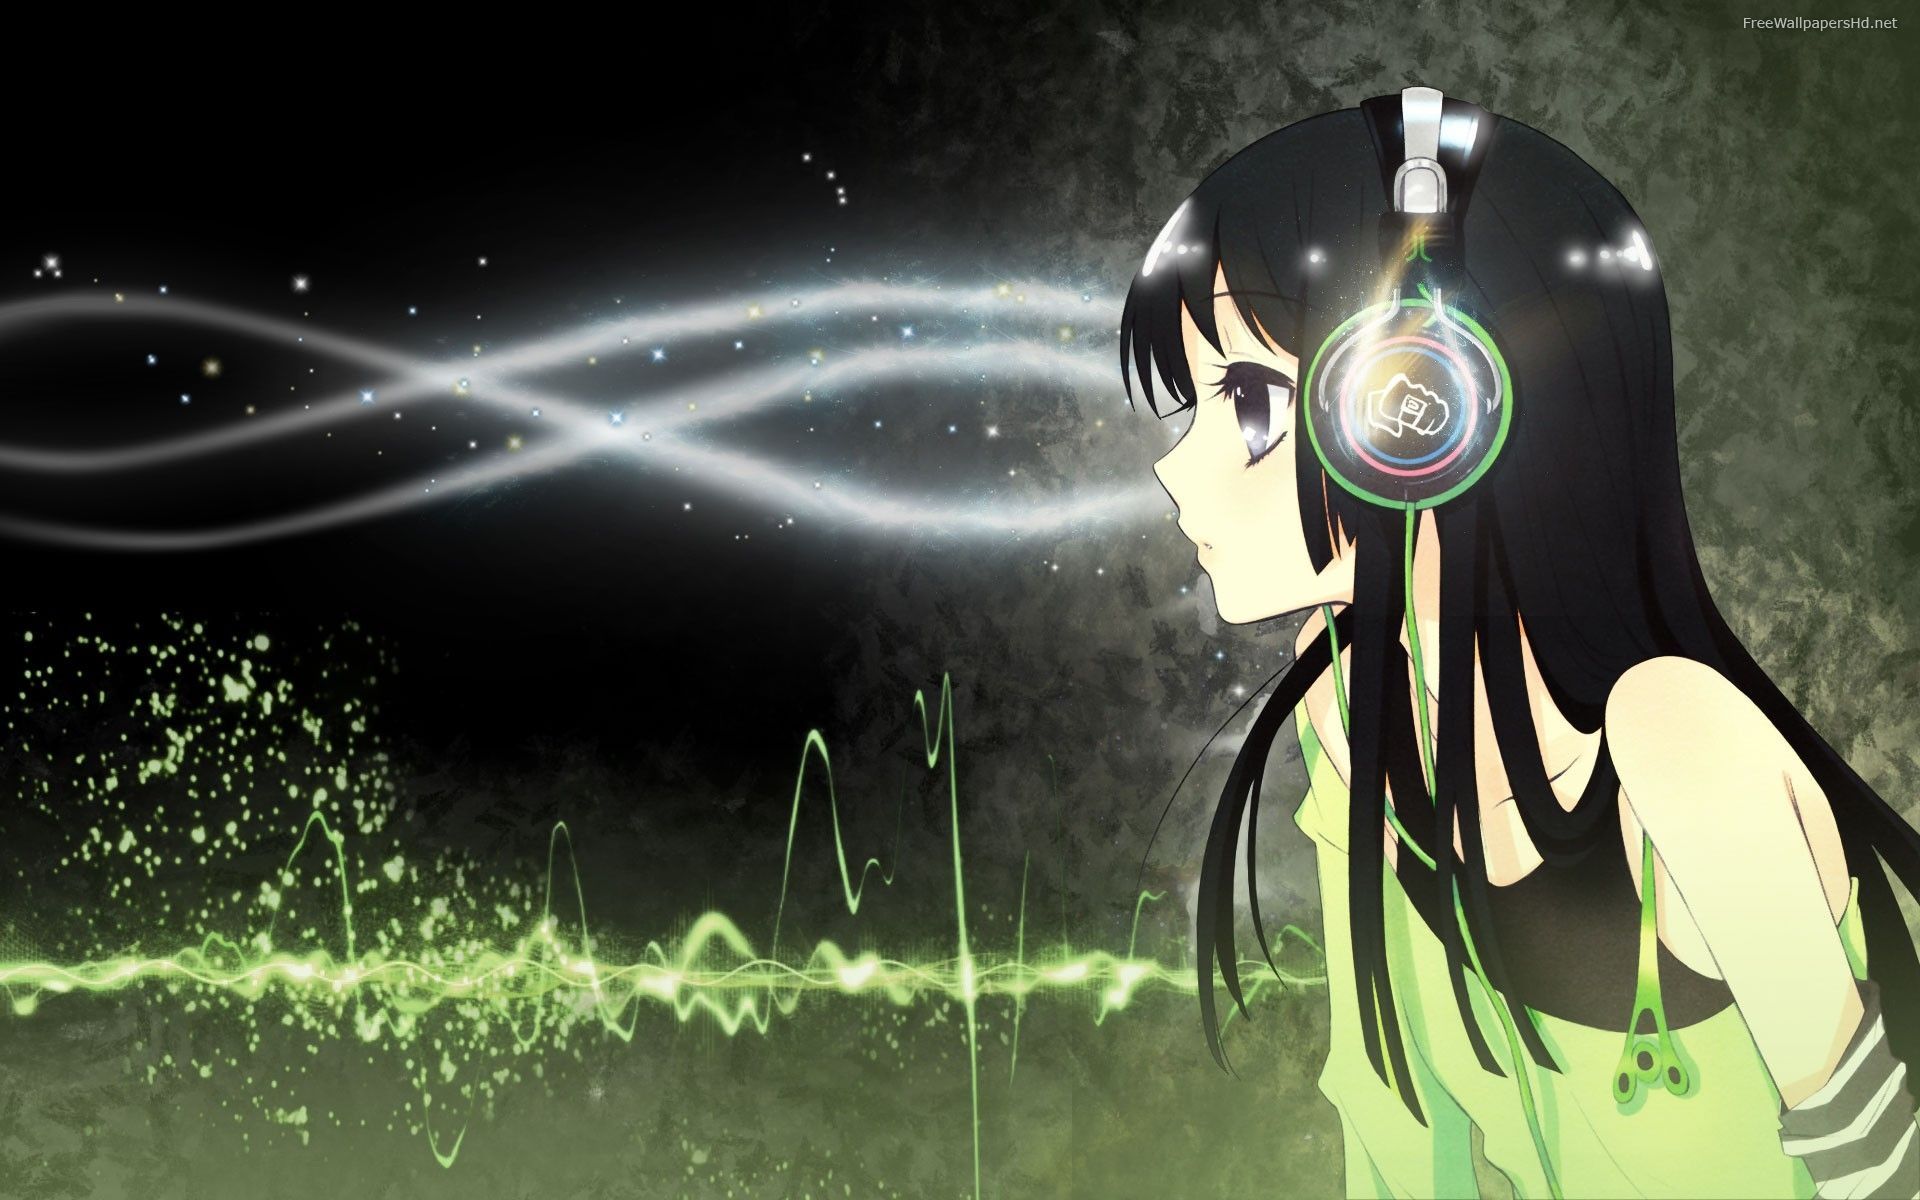 Free Anime Music Wallpaper For iPhone at Movies Monodomo